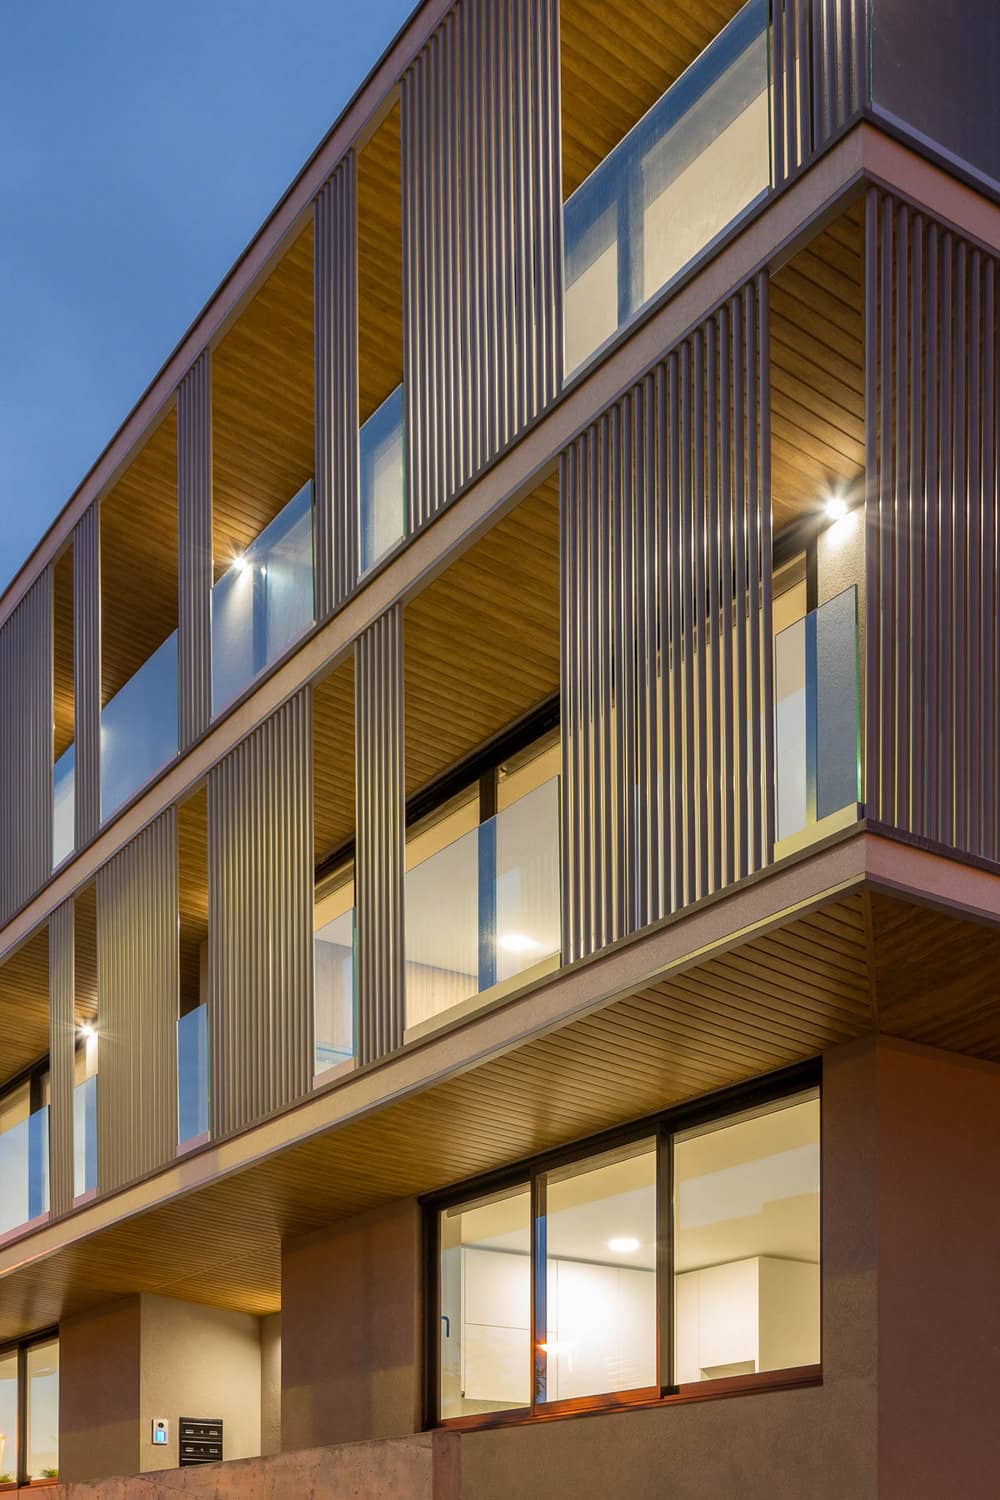 A Vertical Skin Covers a Multi-Family Building